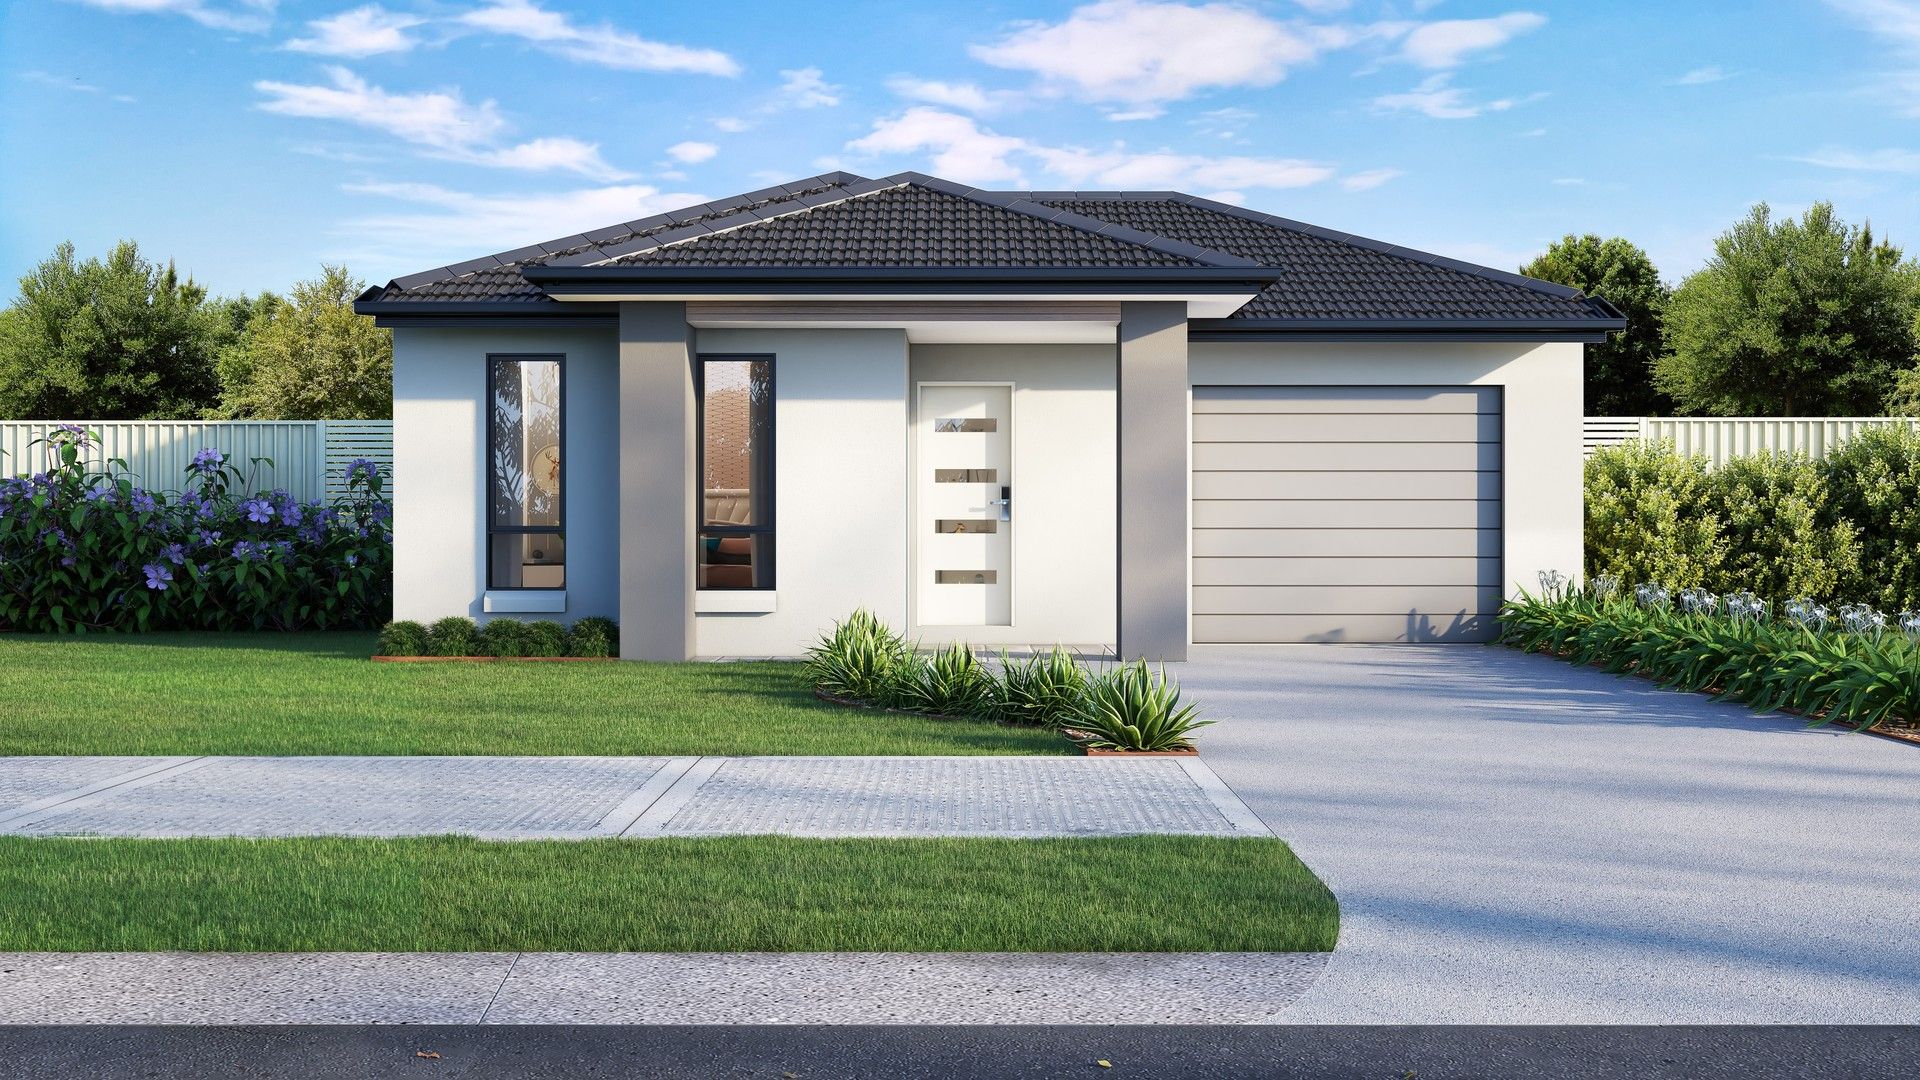 3 bedrooms New House & Land in 1224 Carradale Drive CLYDE NORTH VIC, 3978